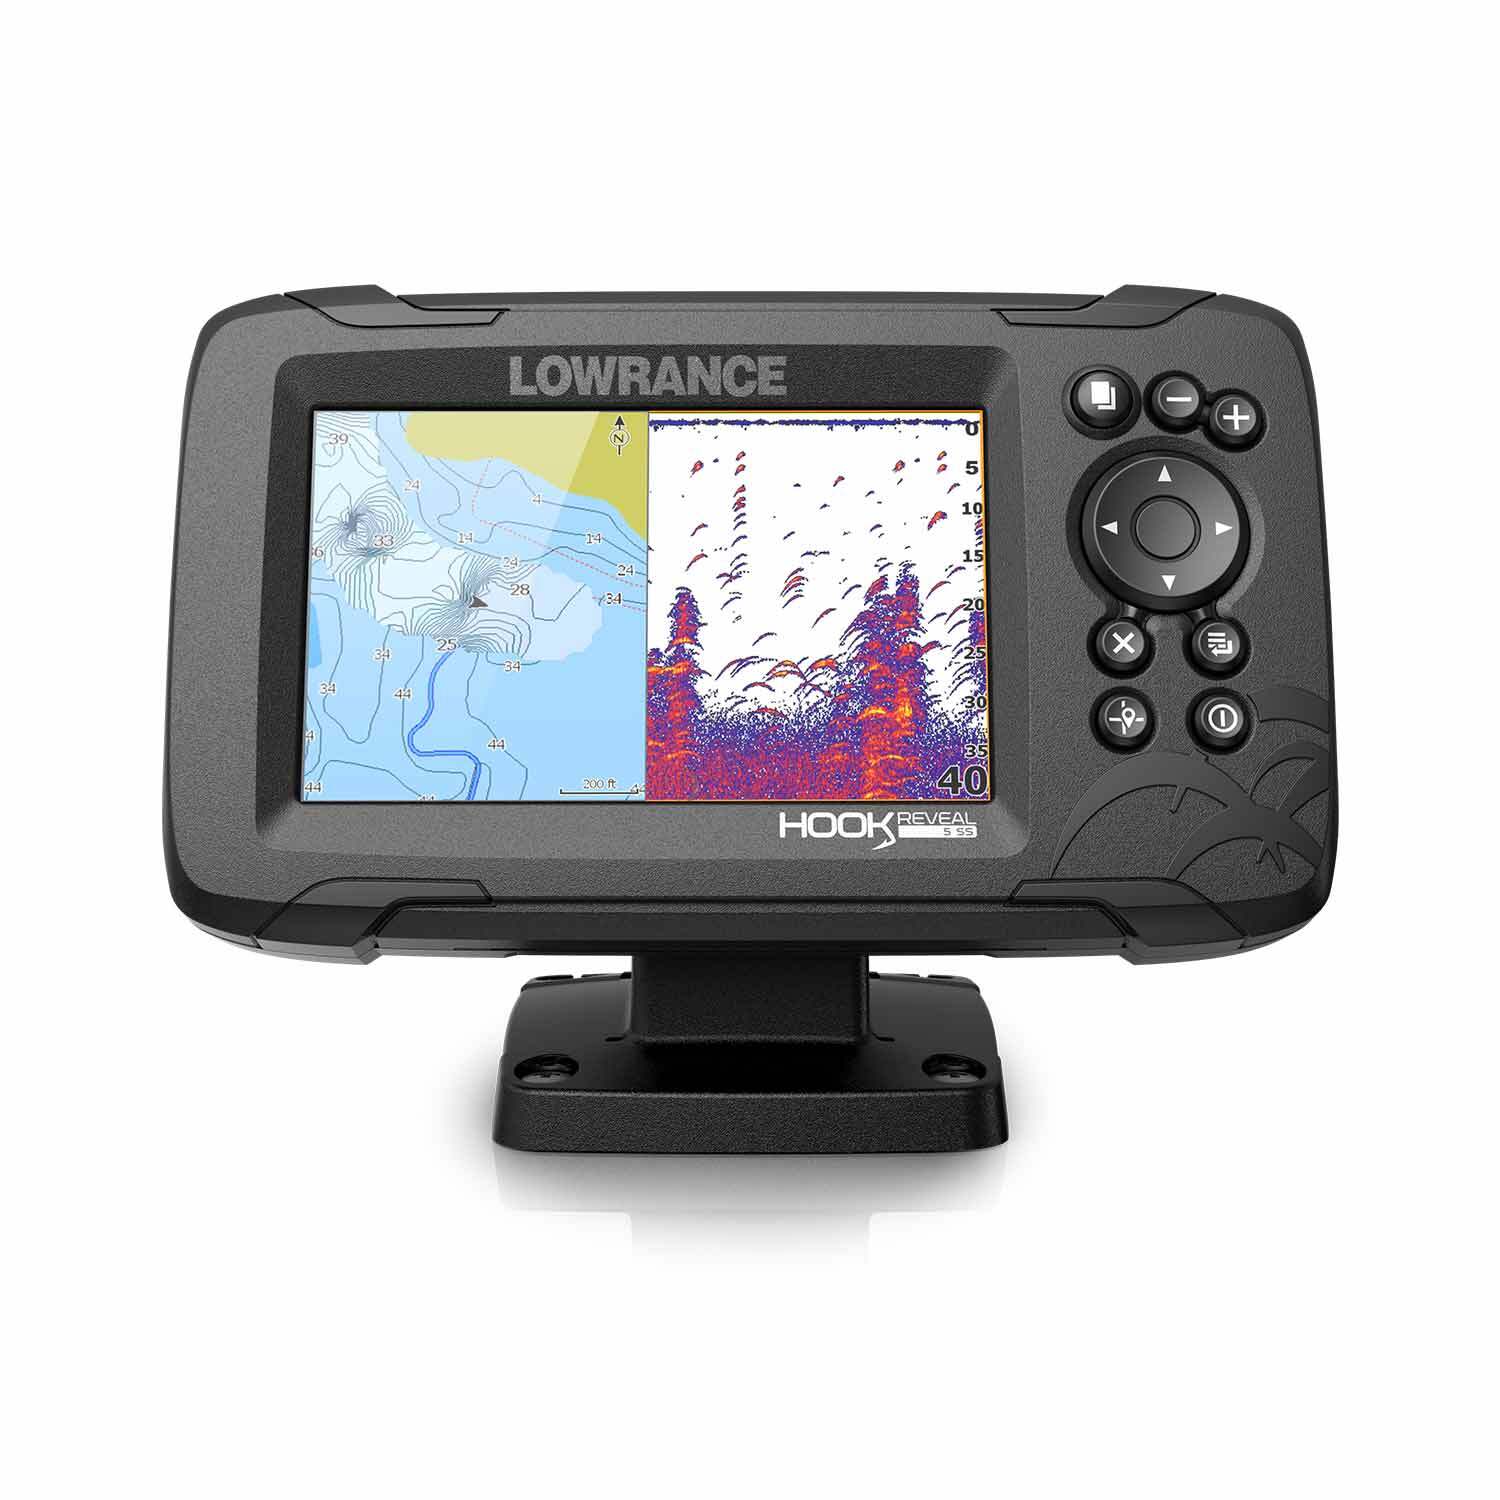 ᐅ Lowrance fish finder and chartplotter【How to read them (+